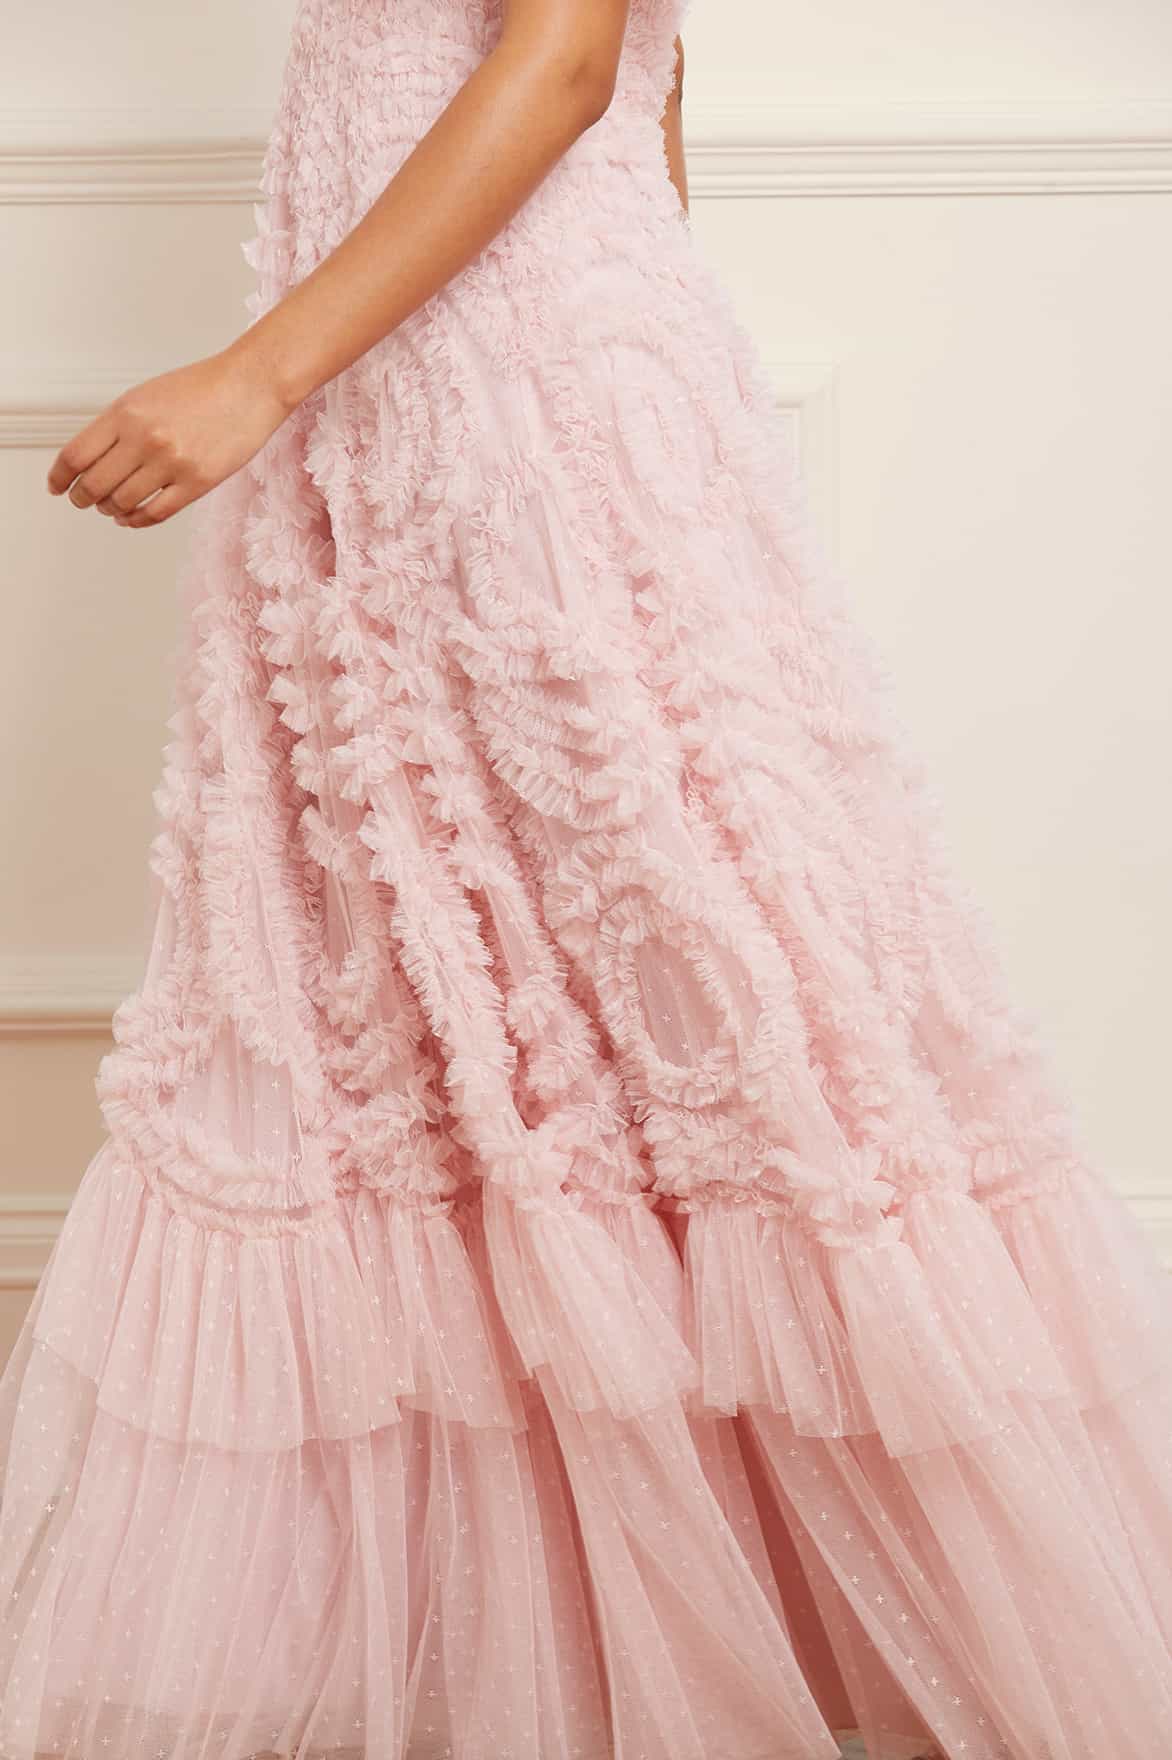 Beautiful Long Pink Tulle Ruffle Neck Prom Dress With Floral Applique -  $136.6885 #S21023 - SheProm.com